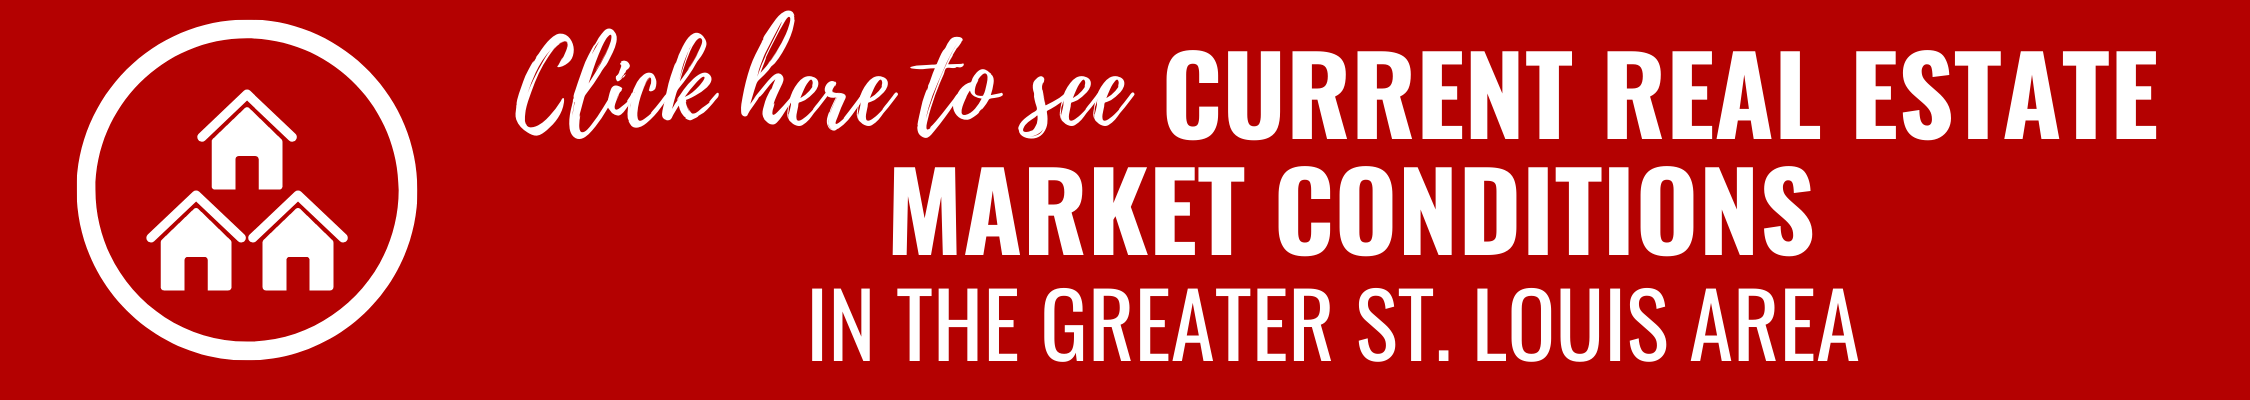 Greater St. Louis Market Conditions